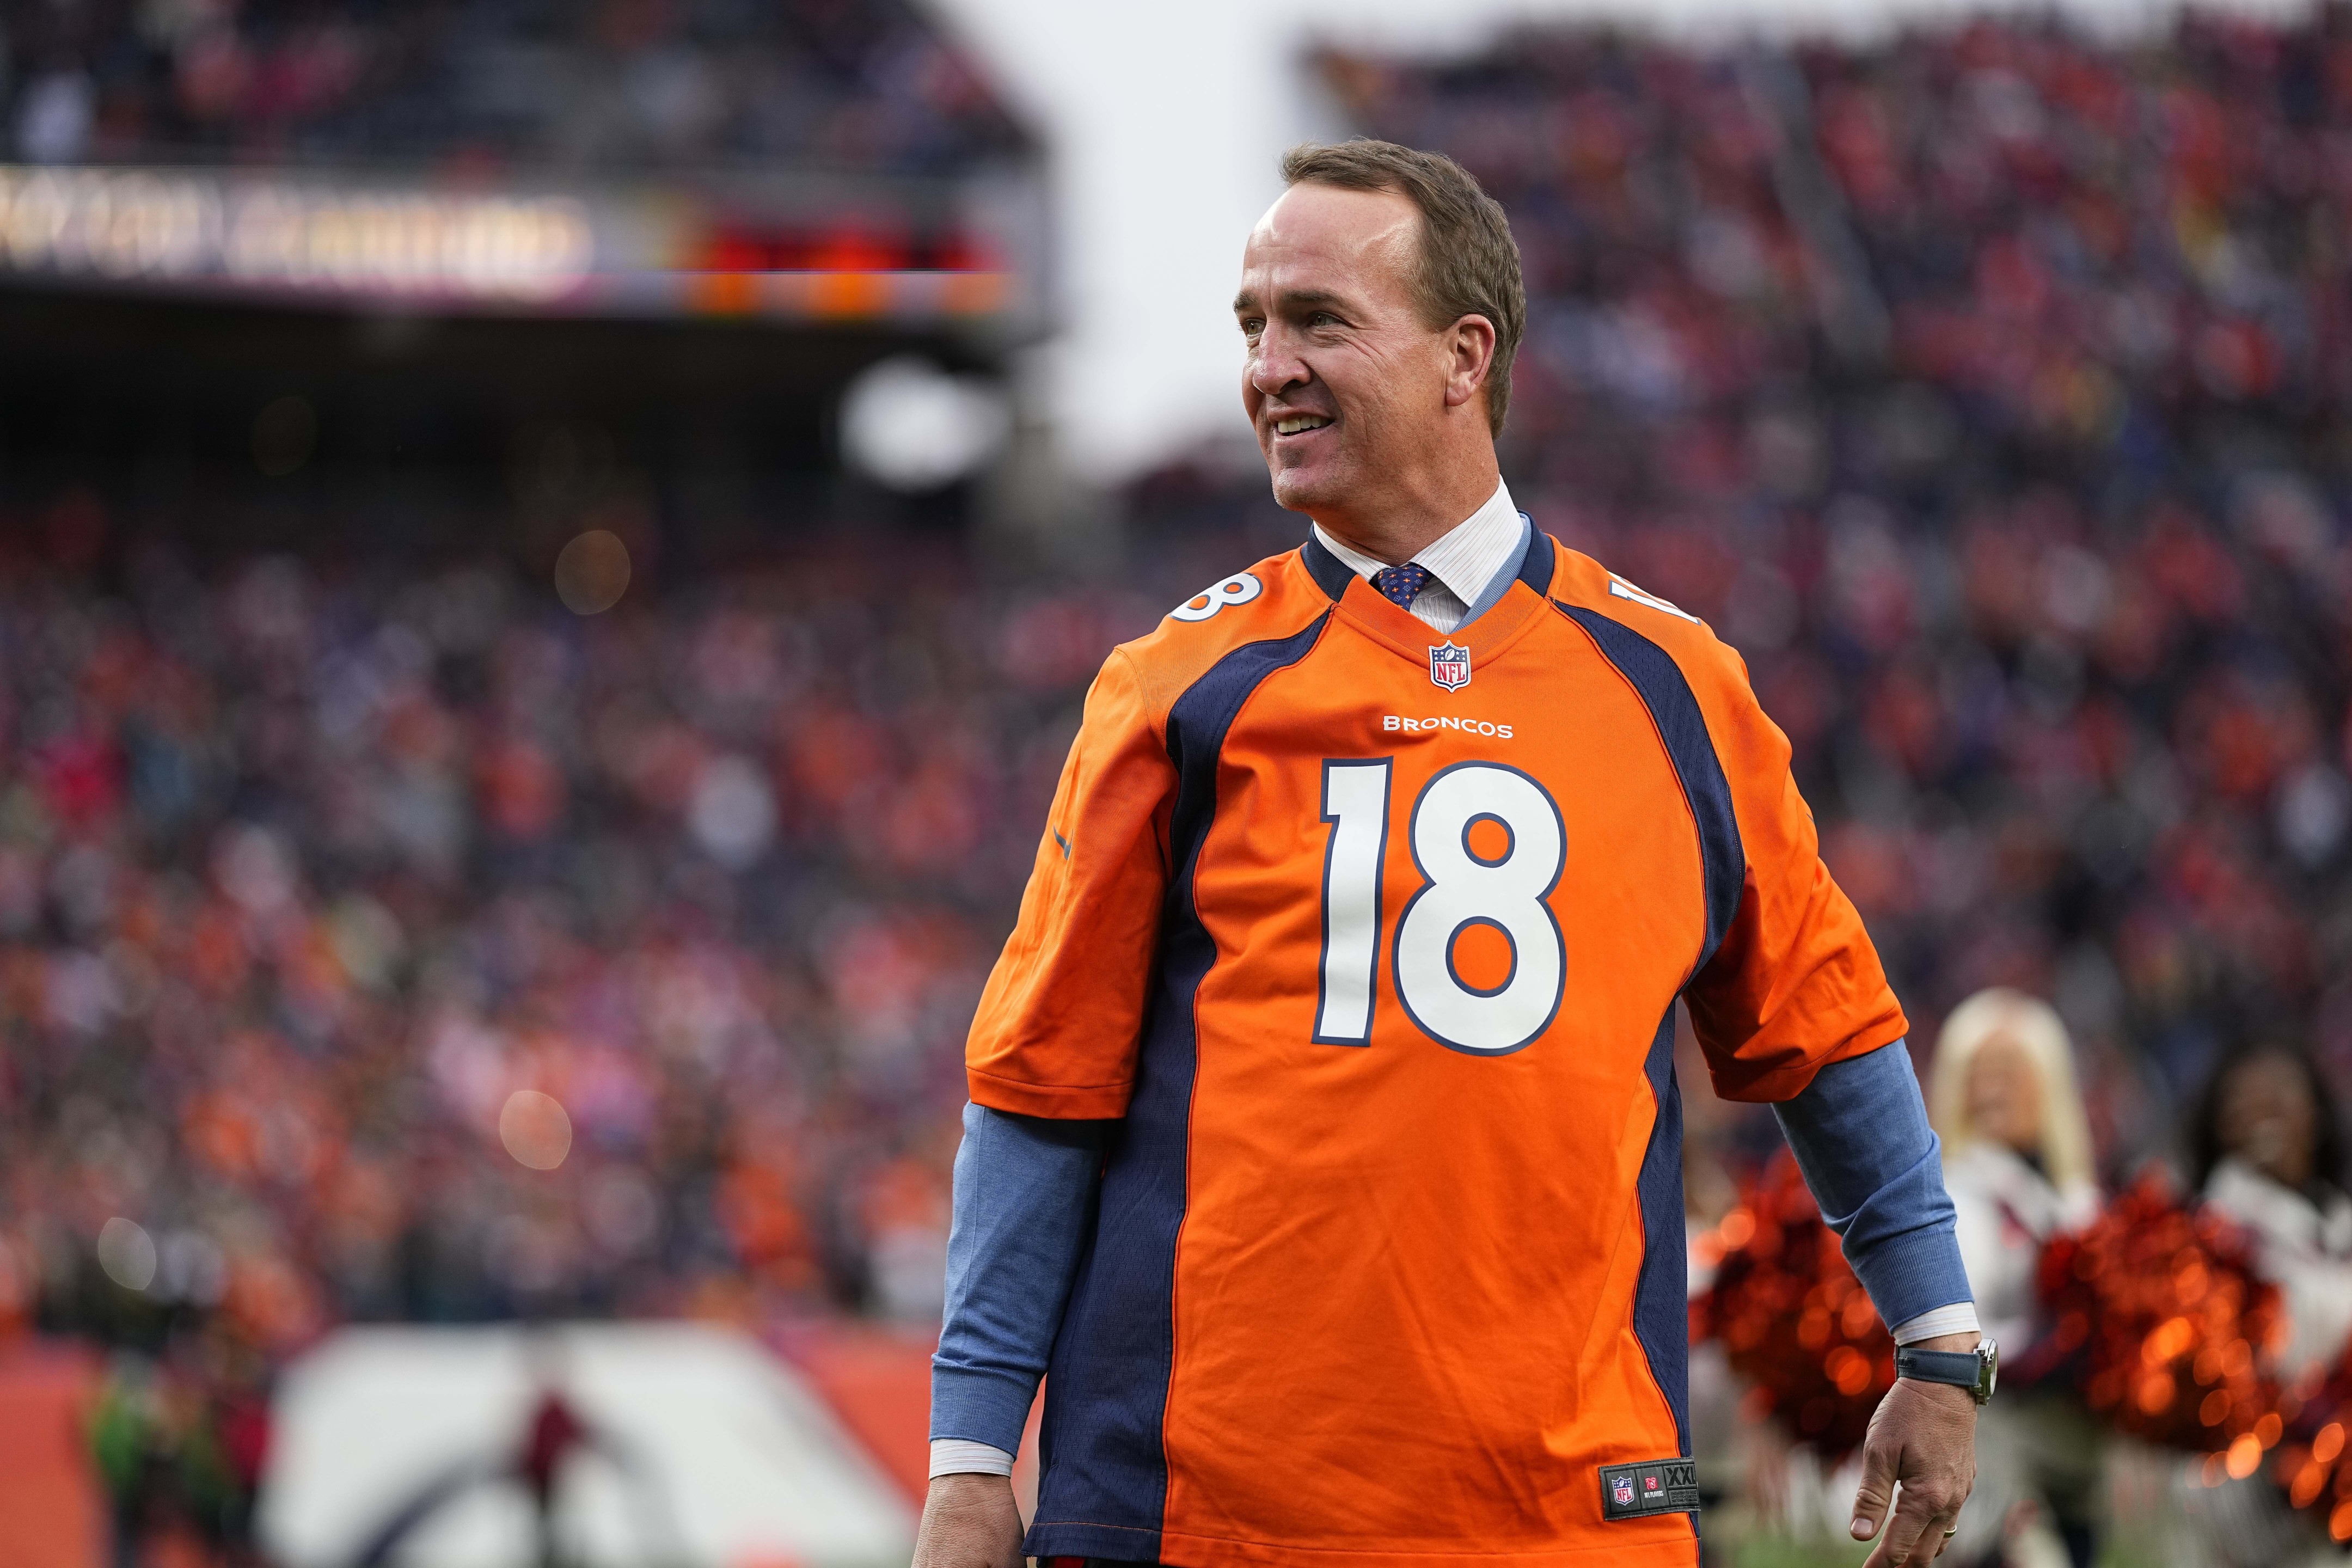 Peyton & Eli Manning to host MNF broadcast - Mile High Report